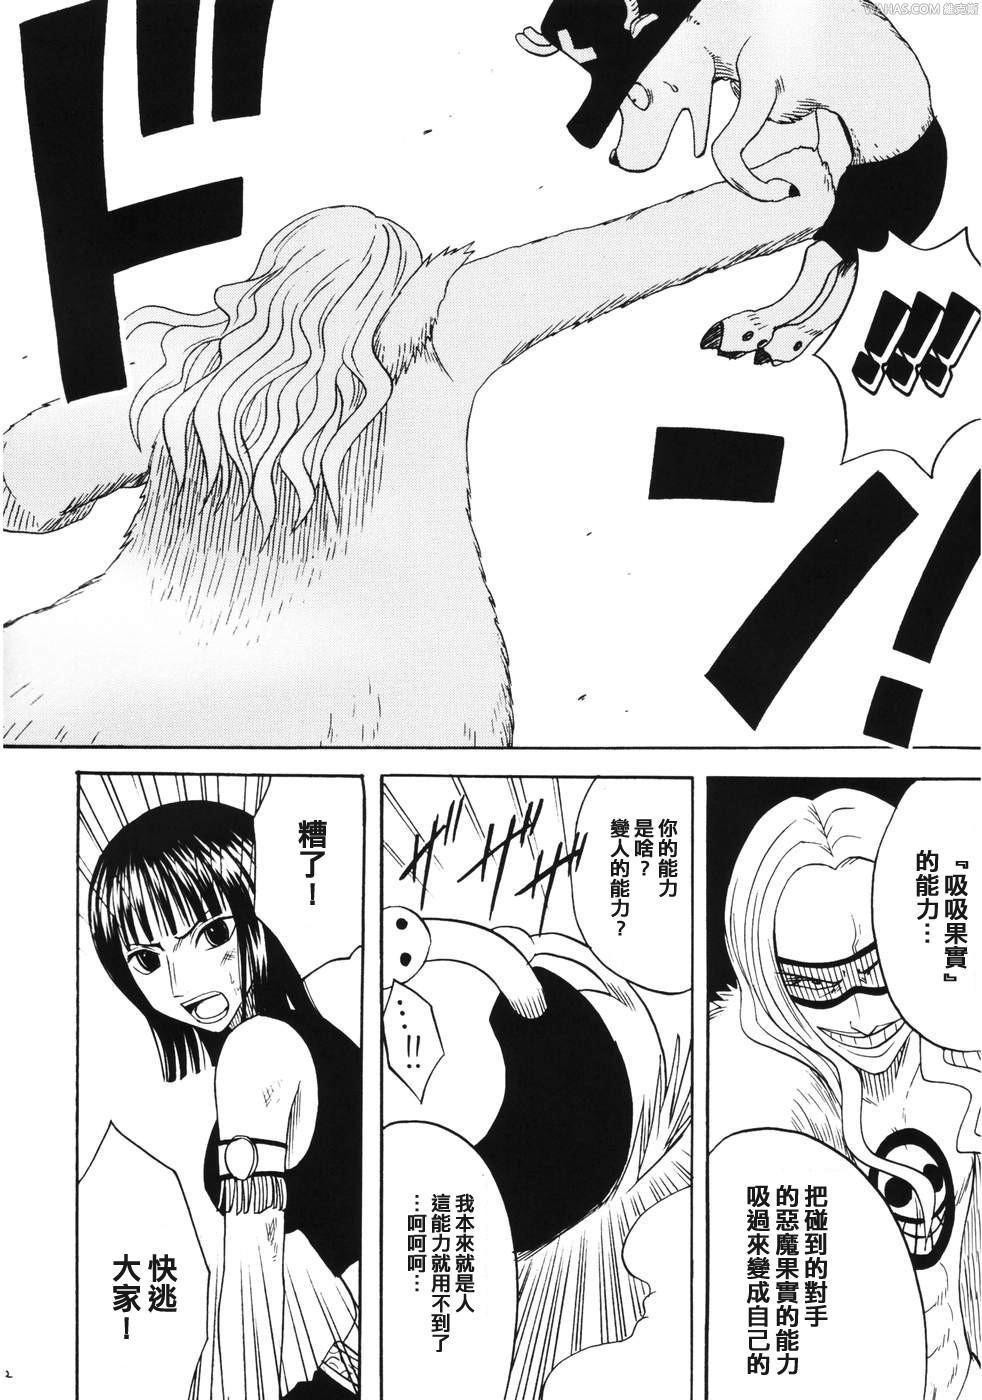 Striptease Dancing Animation Run - One piece Body - Page 11